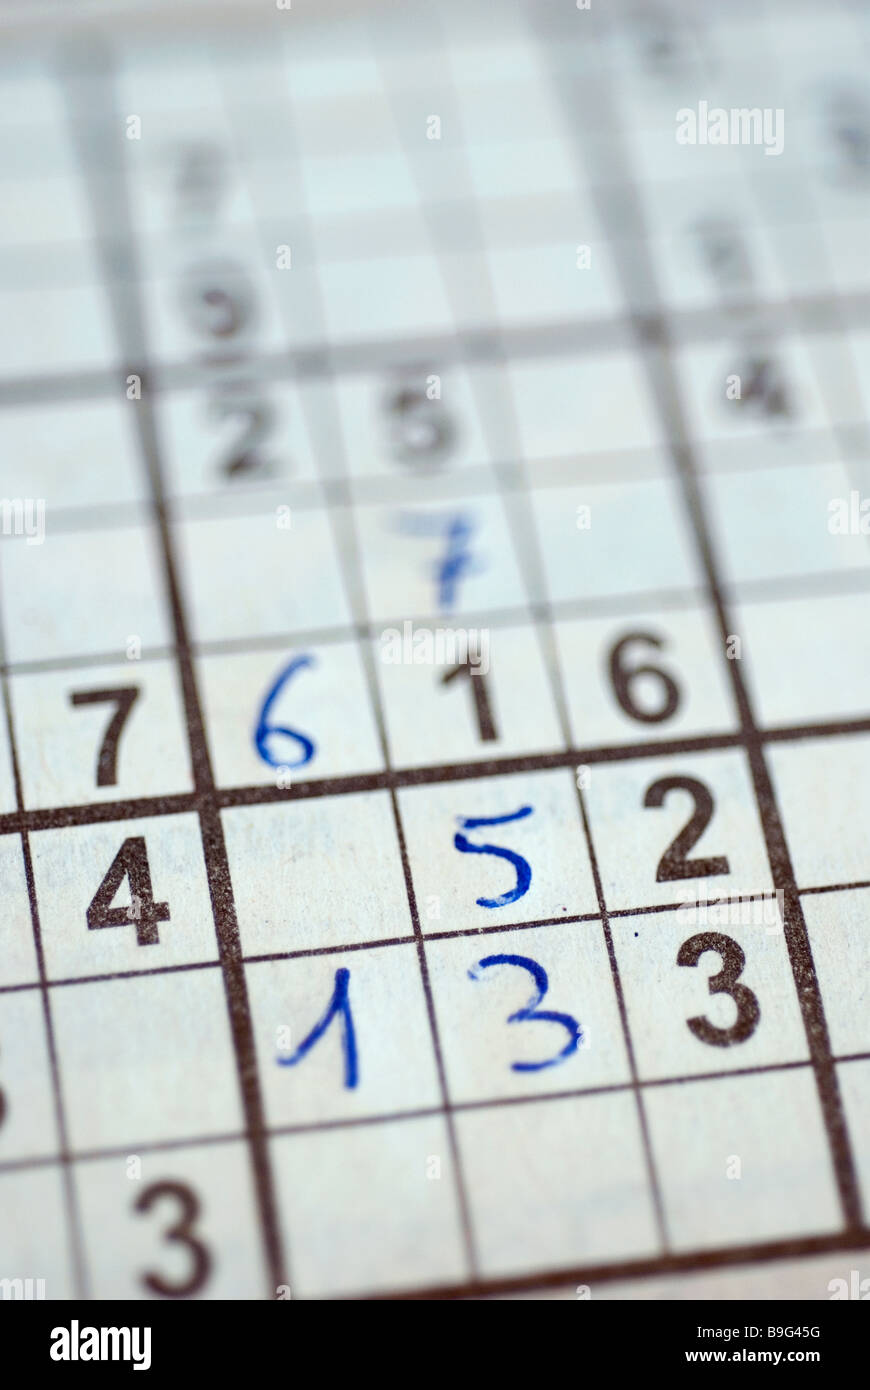 close up view of sudoku puzzle Stock Photo